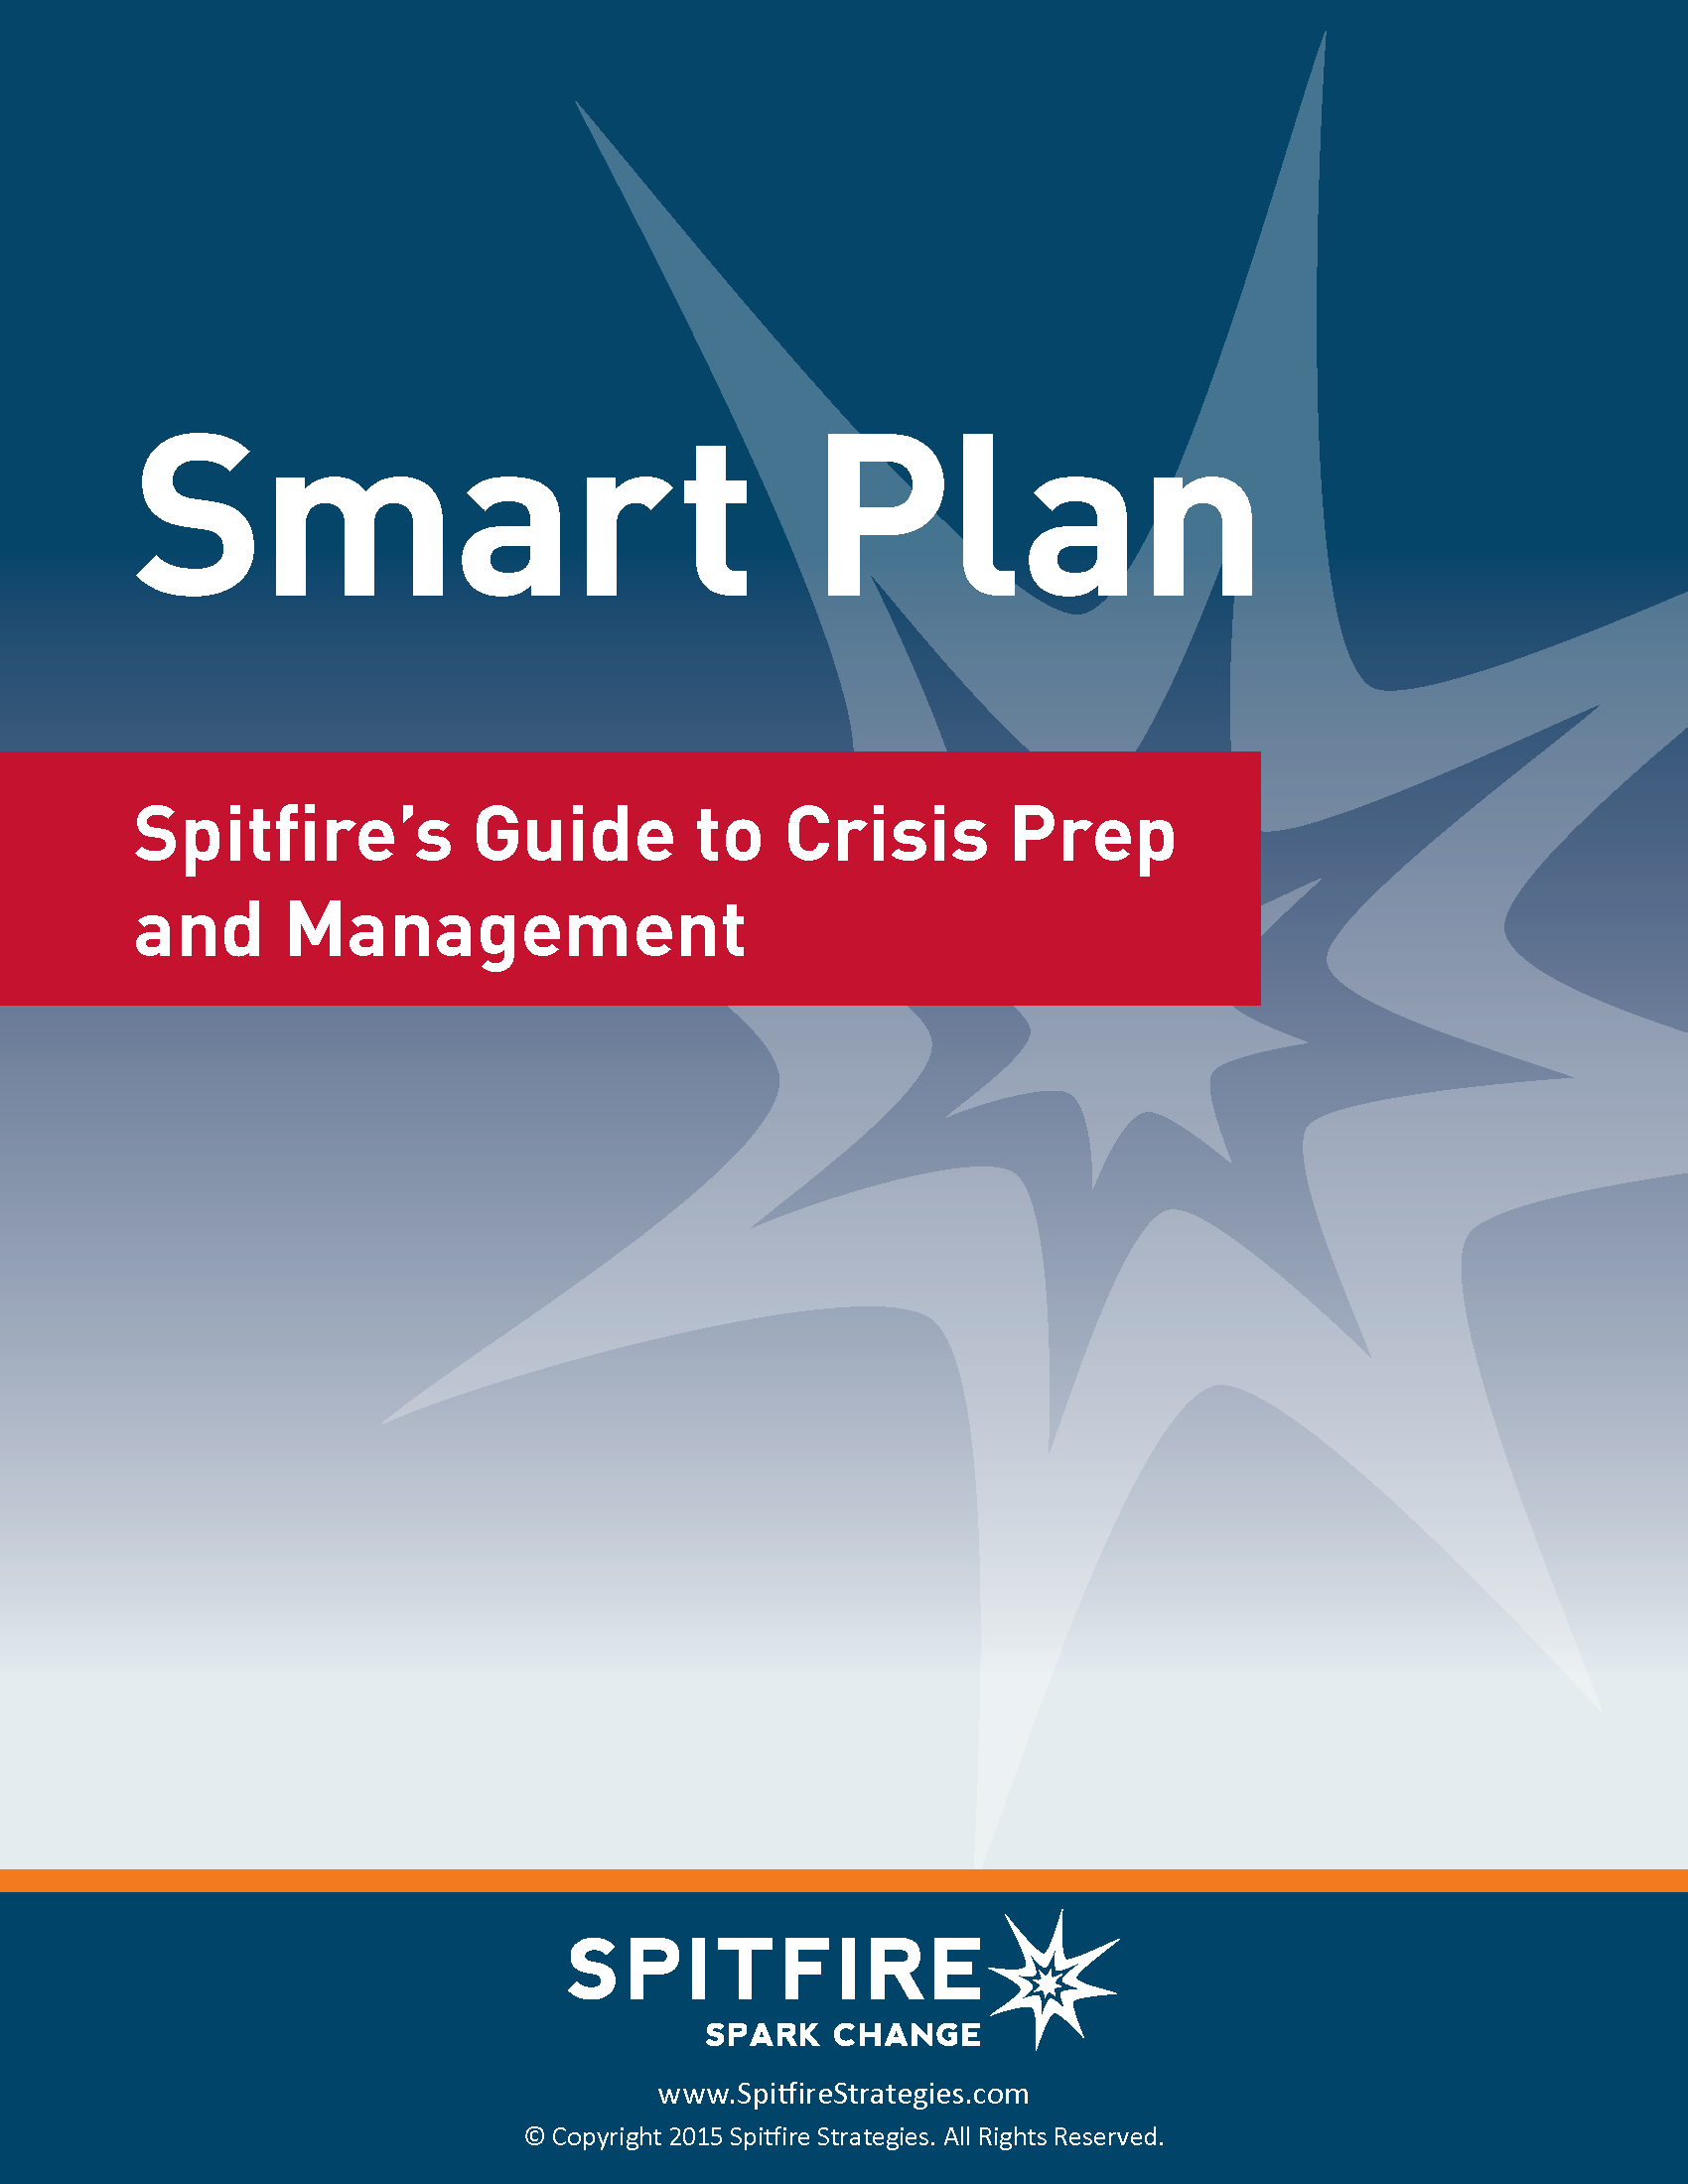 Smart Plan Cover